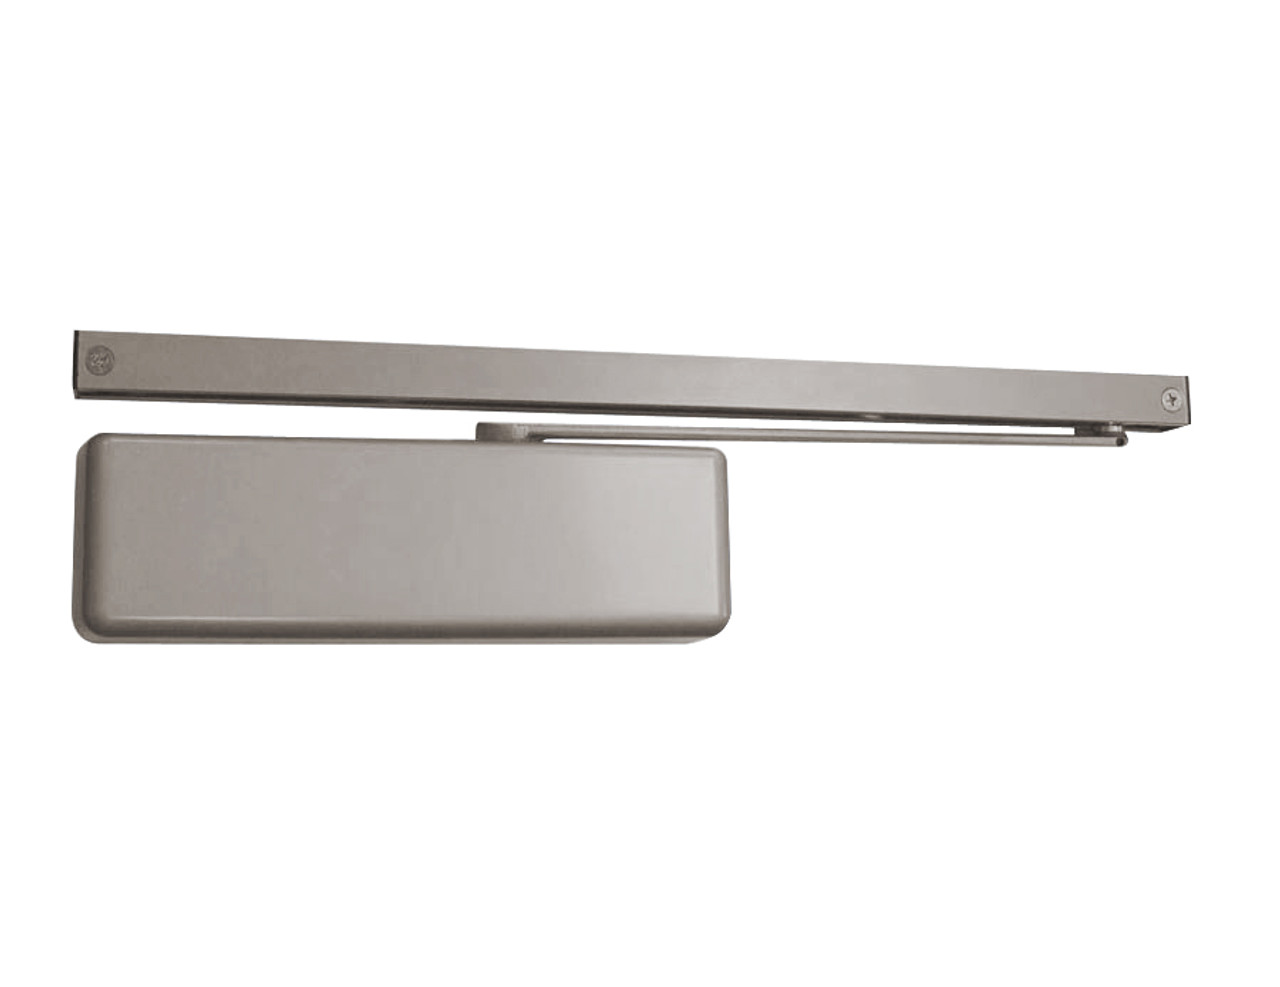 4011T-H-BUMPER-LH-US15 LCN Door Closer Hold Open Track with Bumper in Satin Nickel Finish